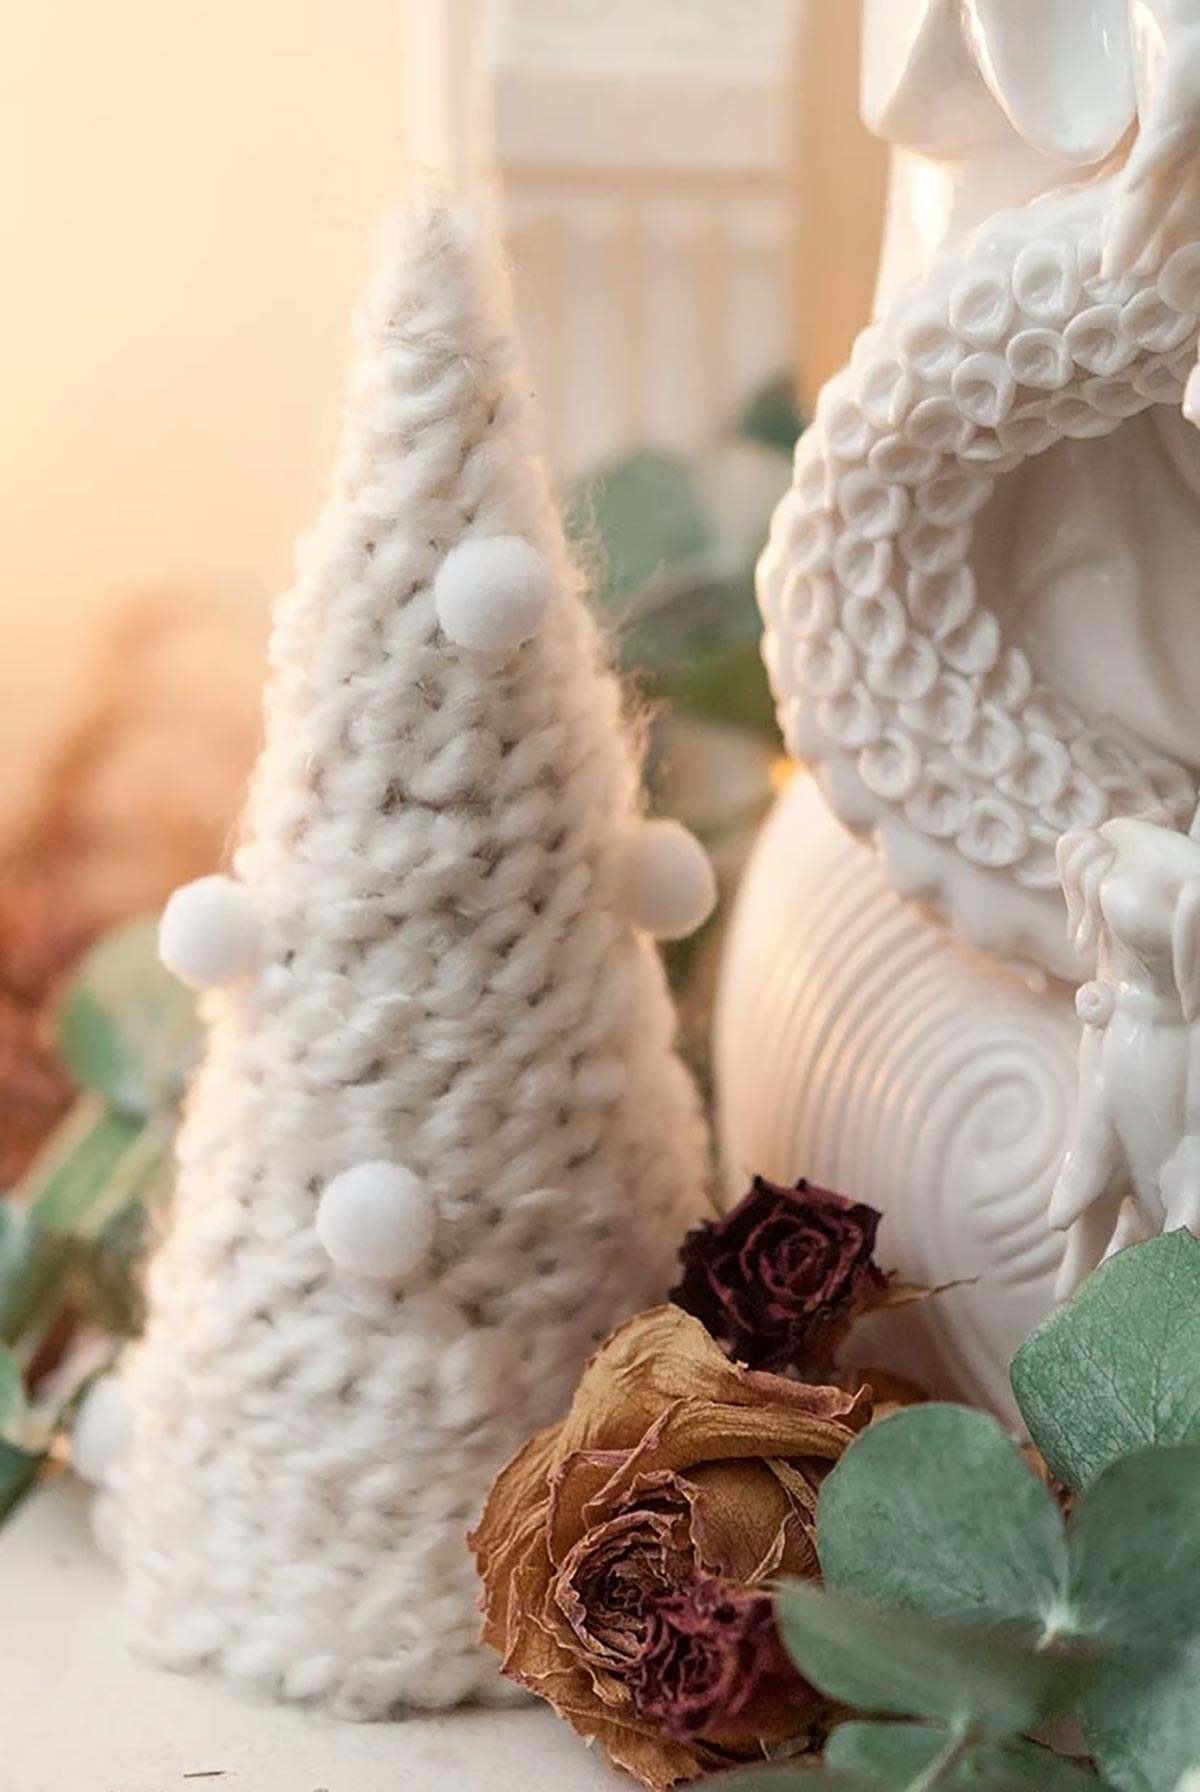 A small Christmas tree made of yarn on a mantle decorated with dry roses and eucalyptus.